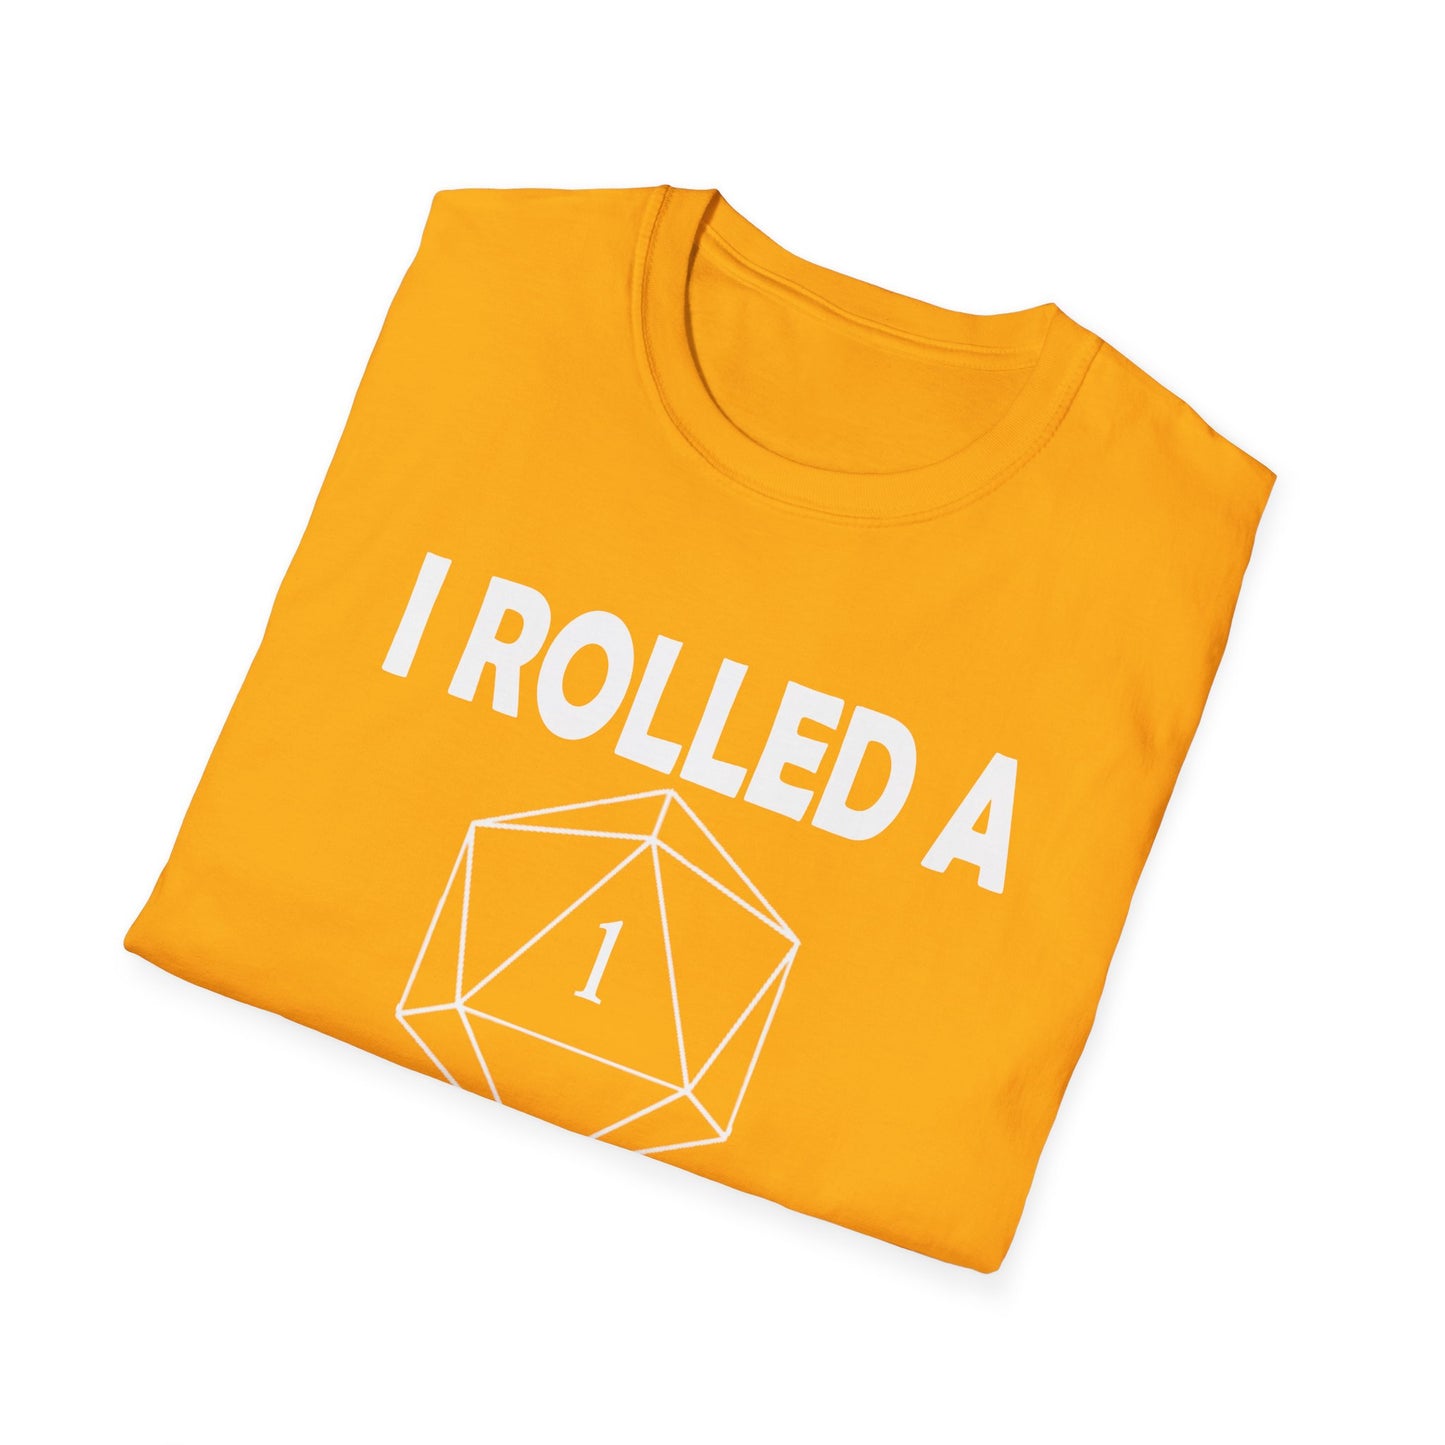 Rolled a 1 for adulting - White - Unisex Softstyle T-Shirt